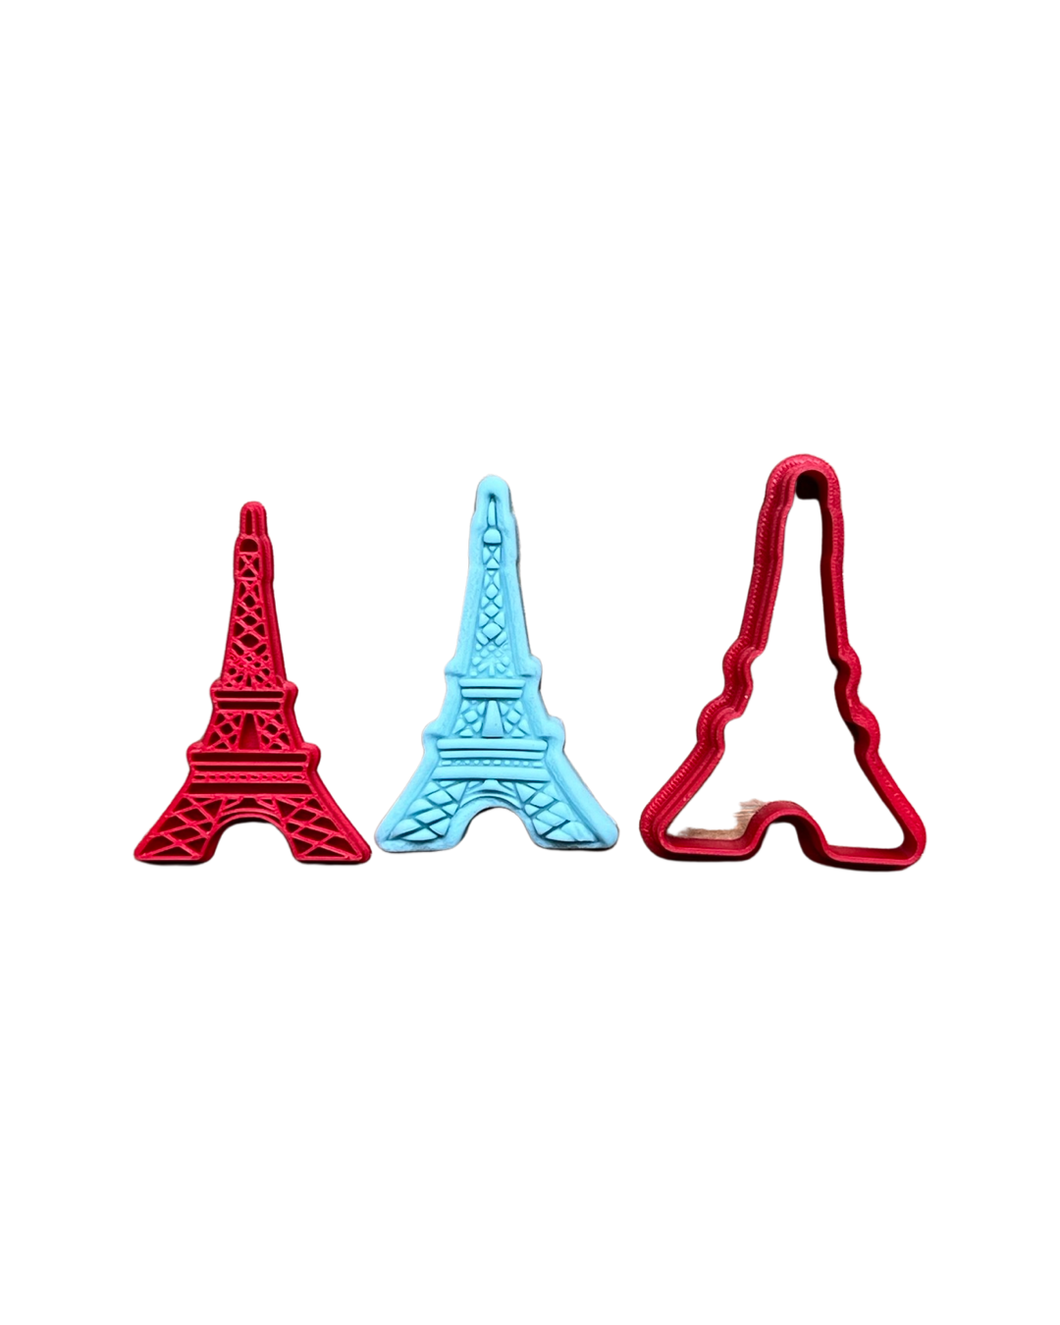 French theme cookie cutter Paris Eiffel Tower